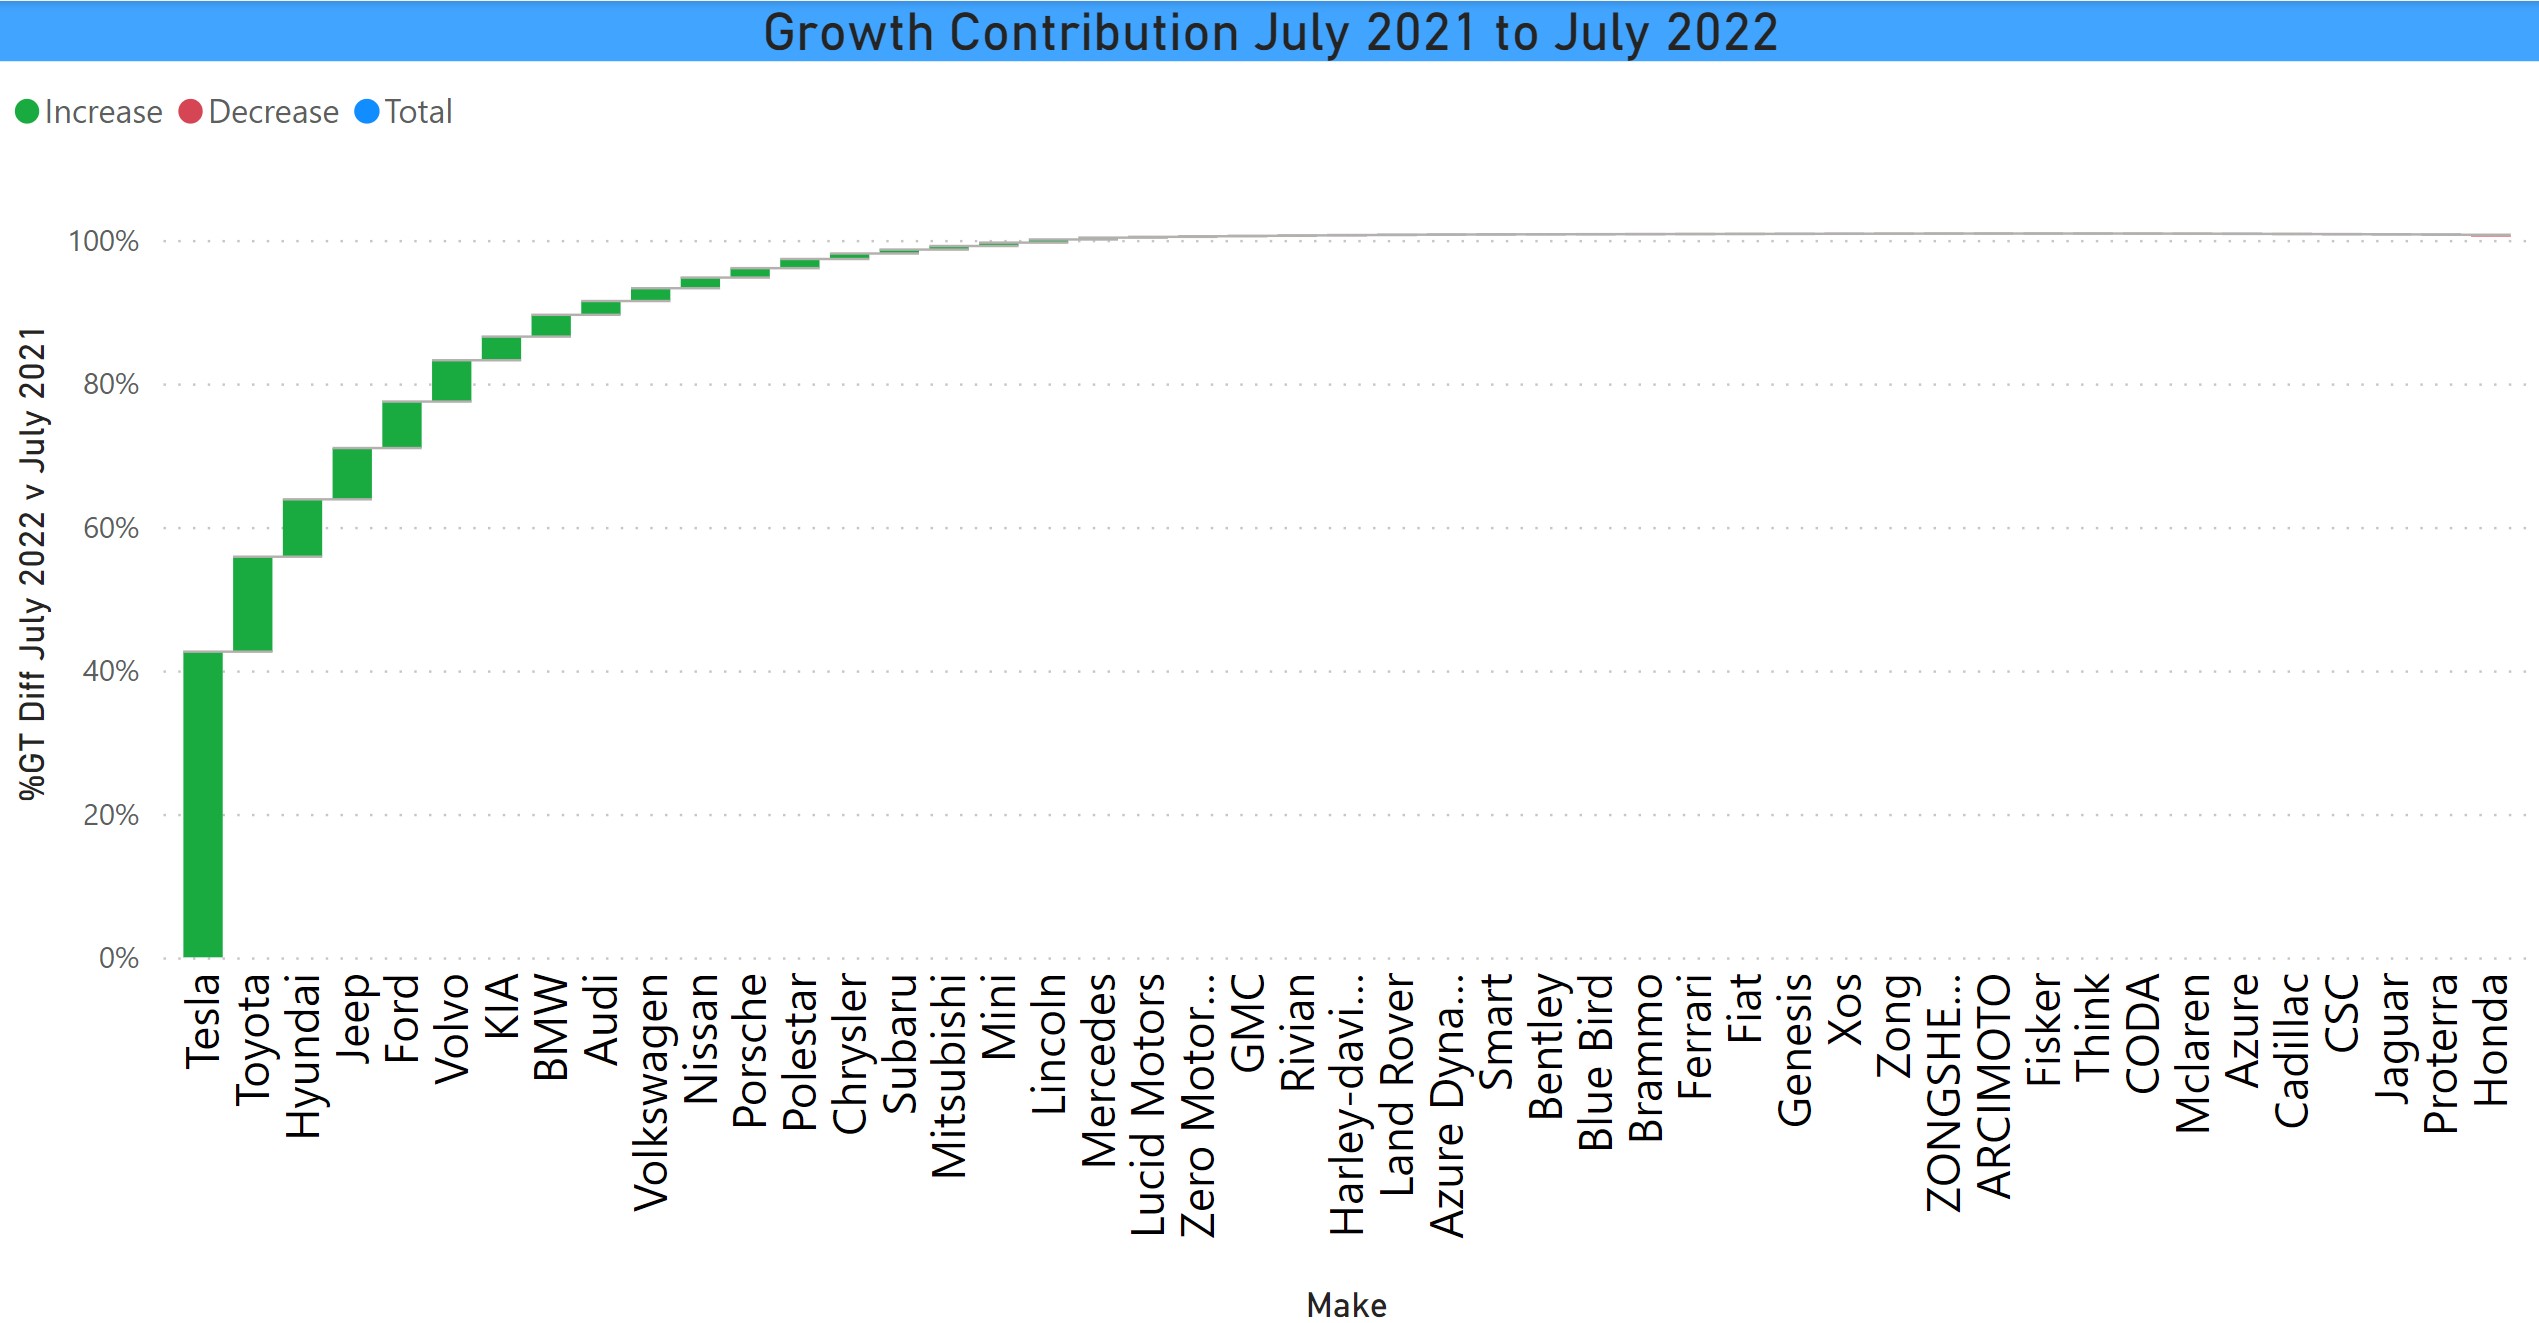 EV Growth Contribution by Make